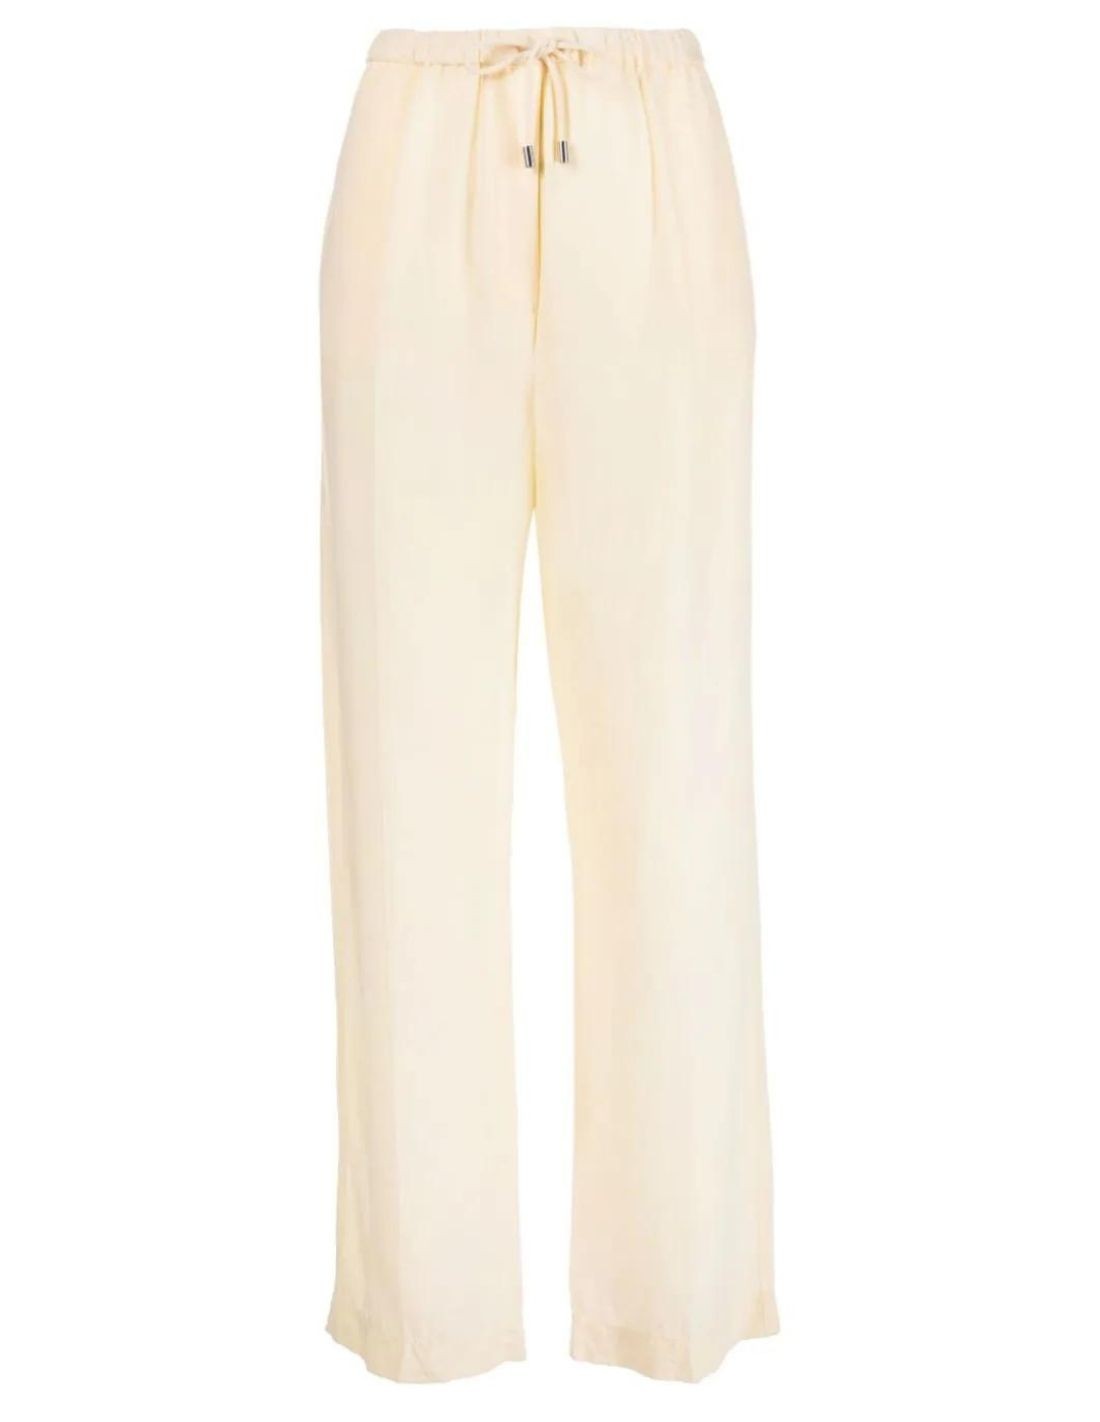 Toteme straight drawstring pants in beige spring-summer 2023